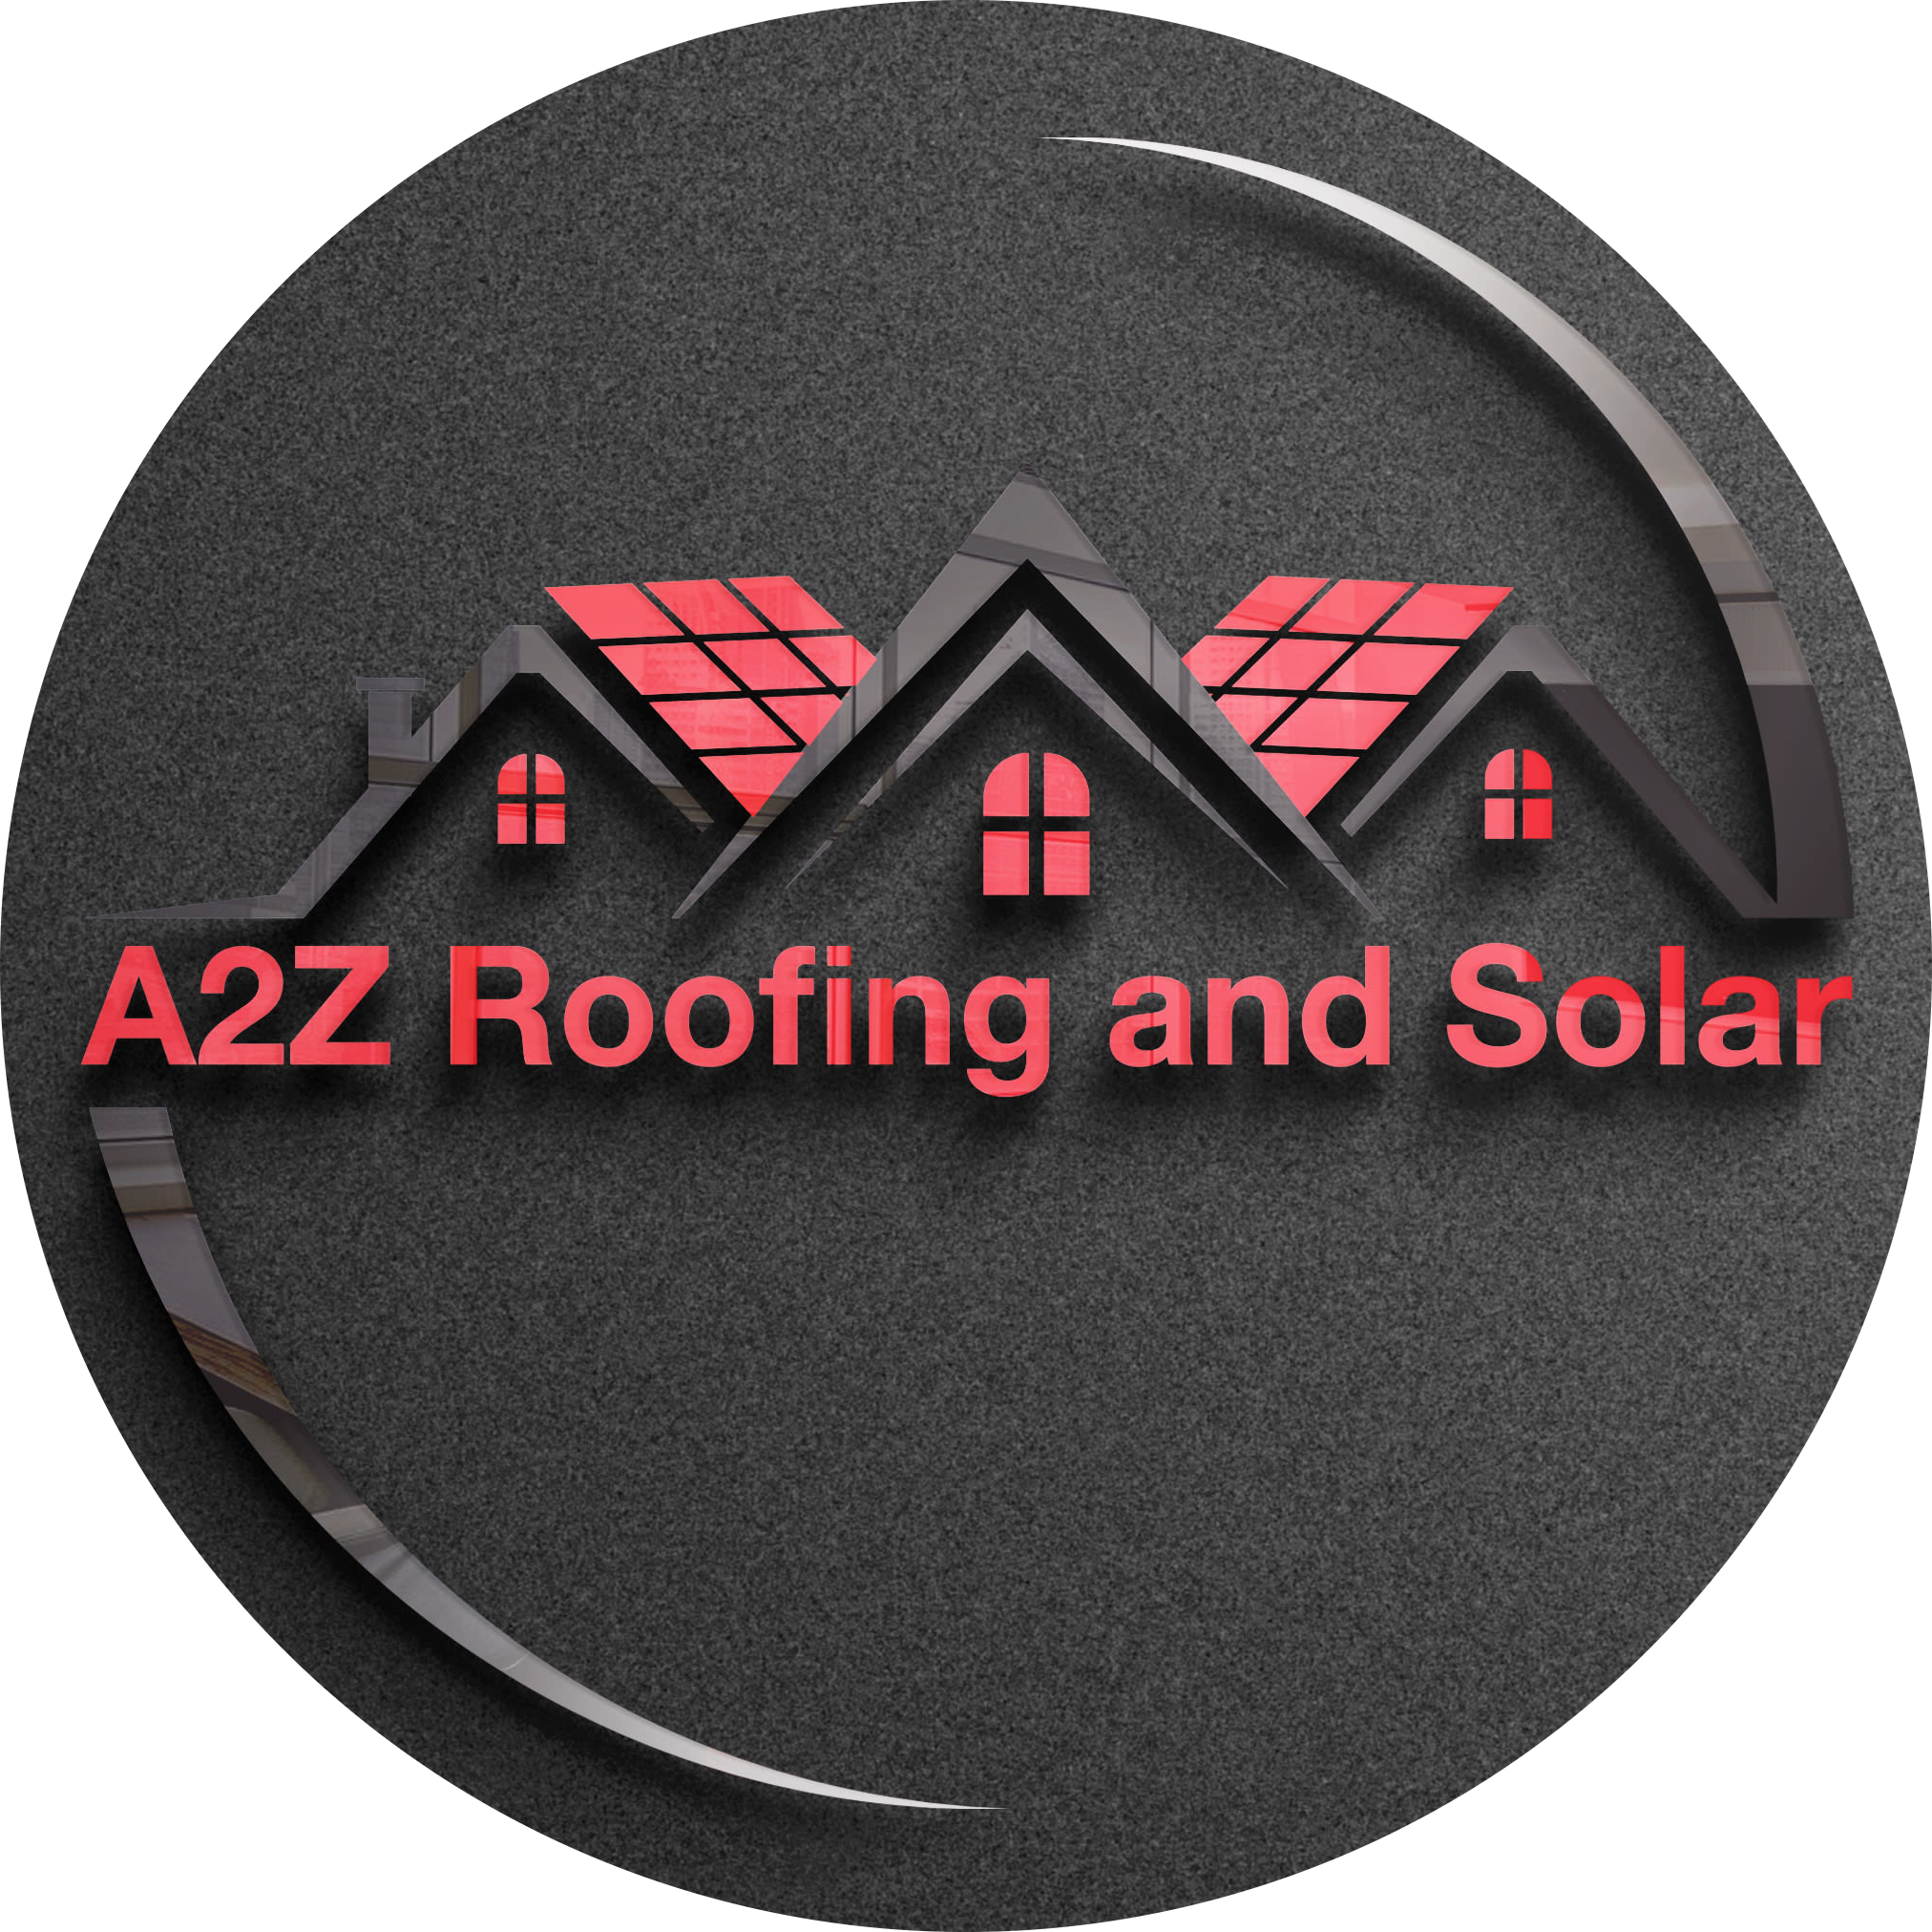 A2Z Roofing and Solar